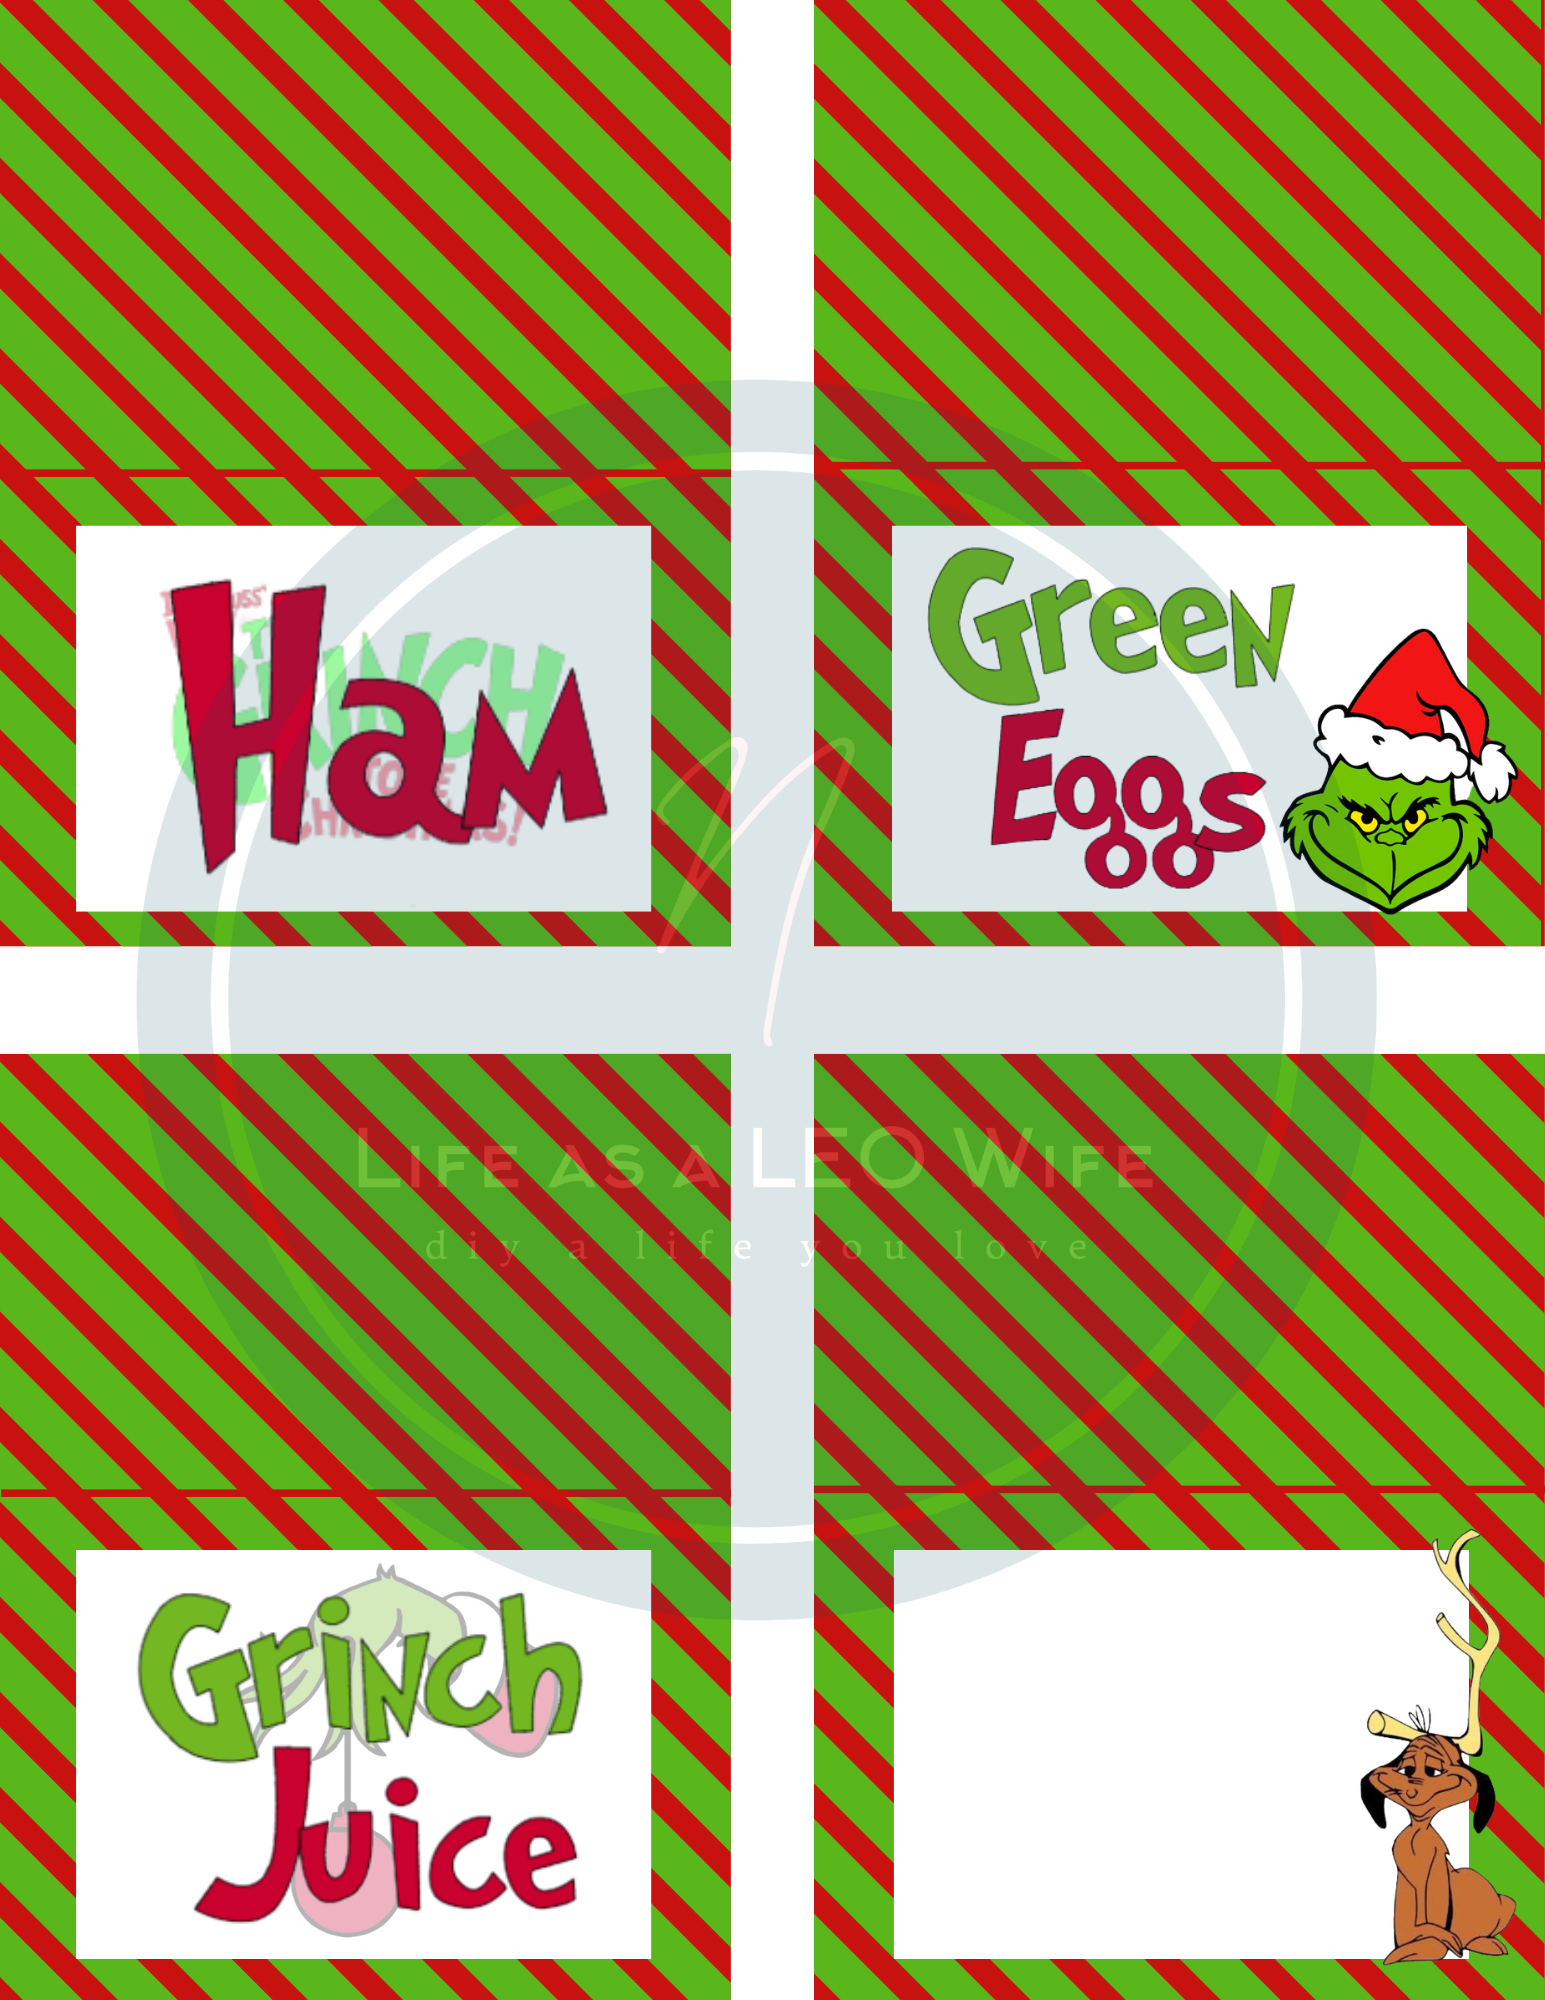 Food tent cards for a Grinch movie night with green eggs, ham, and Grinch juice on them.